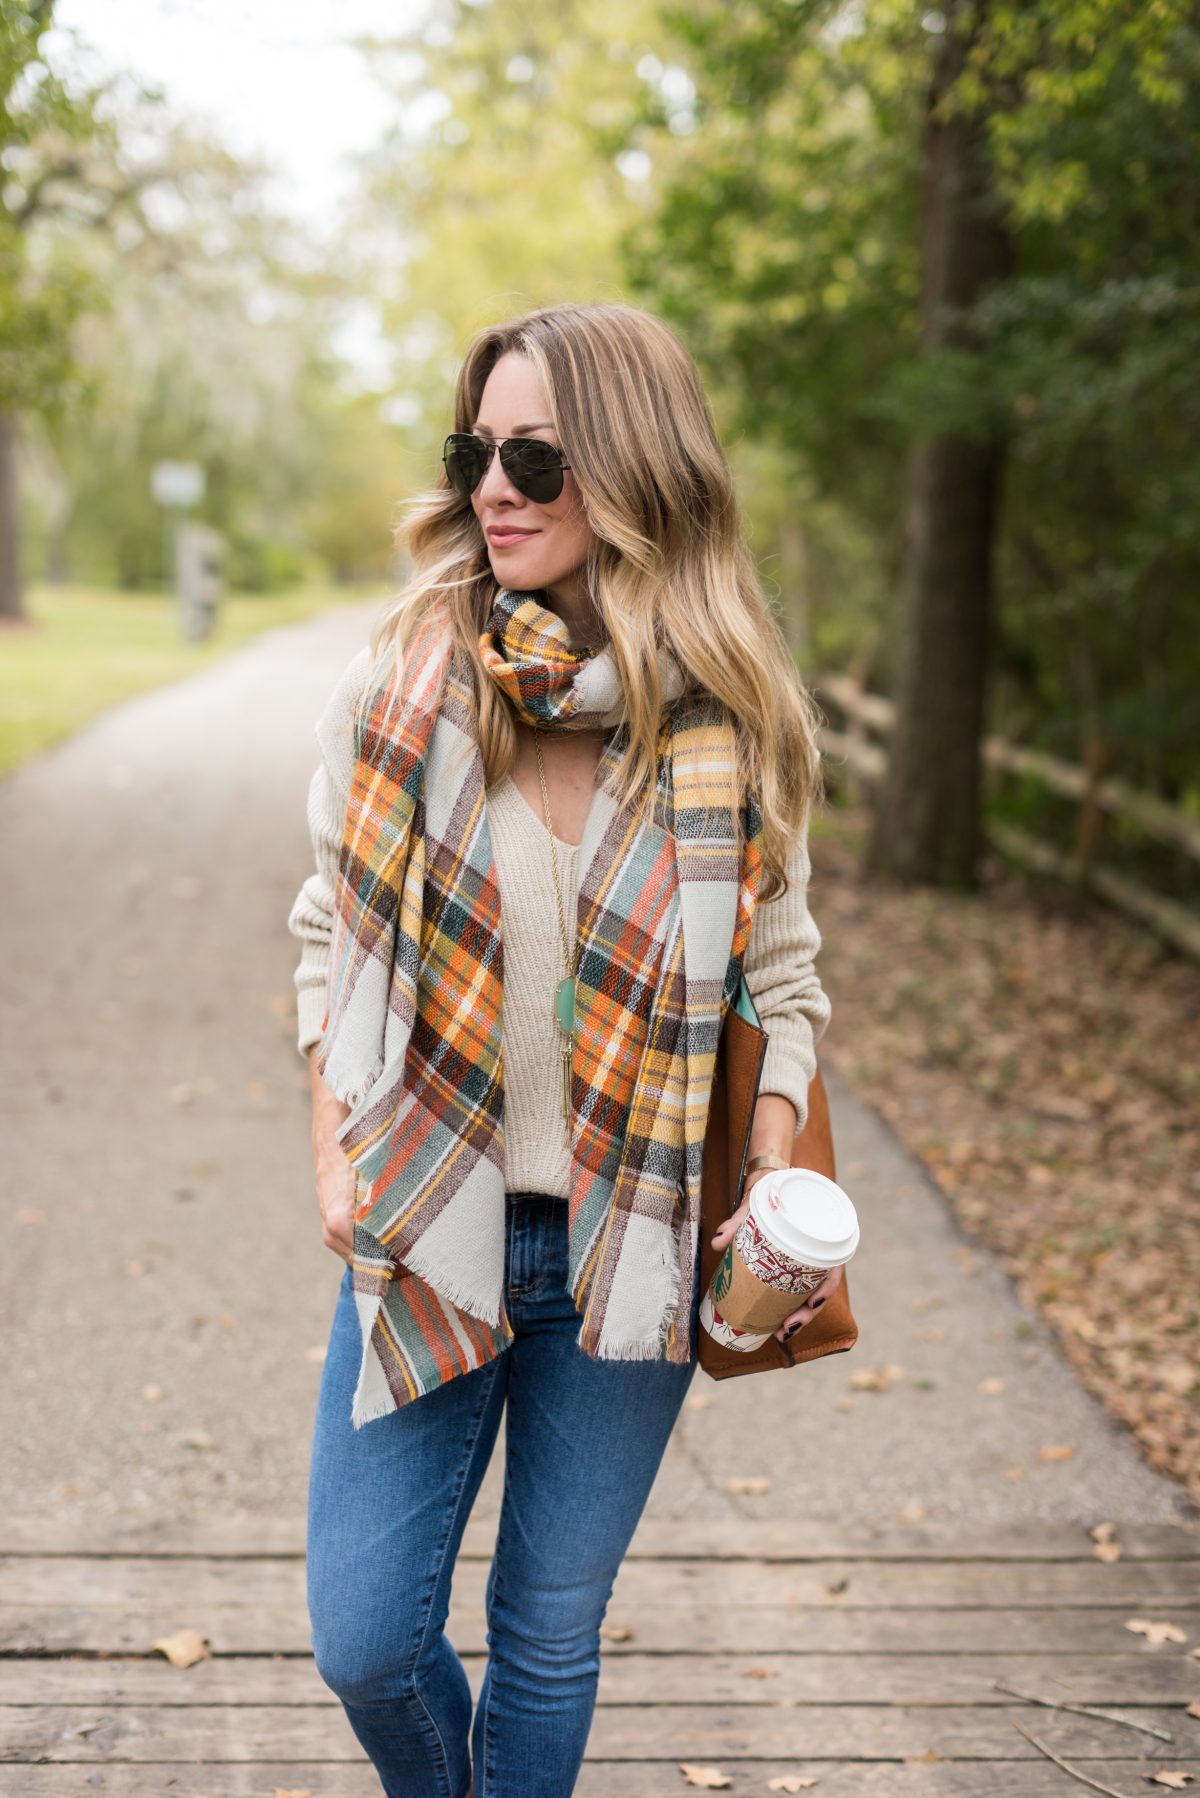 How to Put Together a Foolproof Cute Fall Outfit!